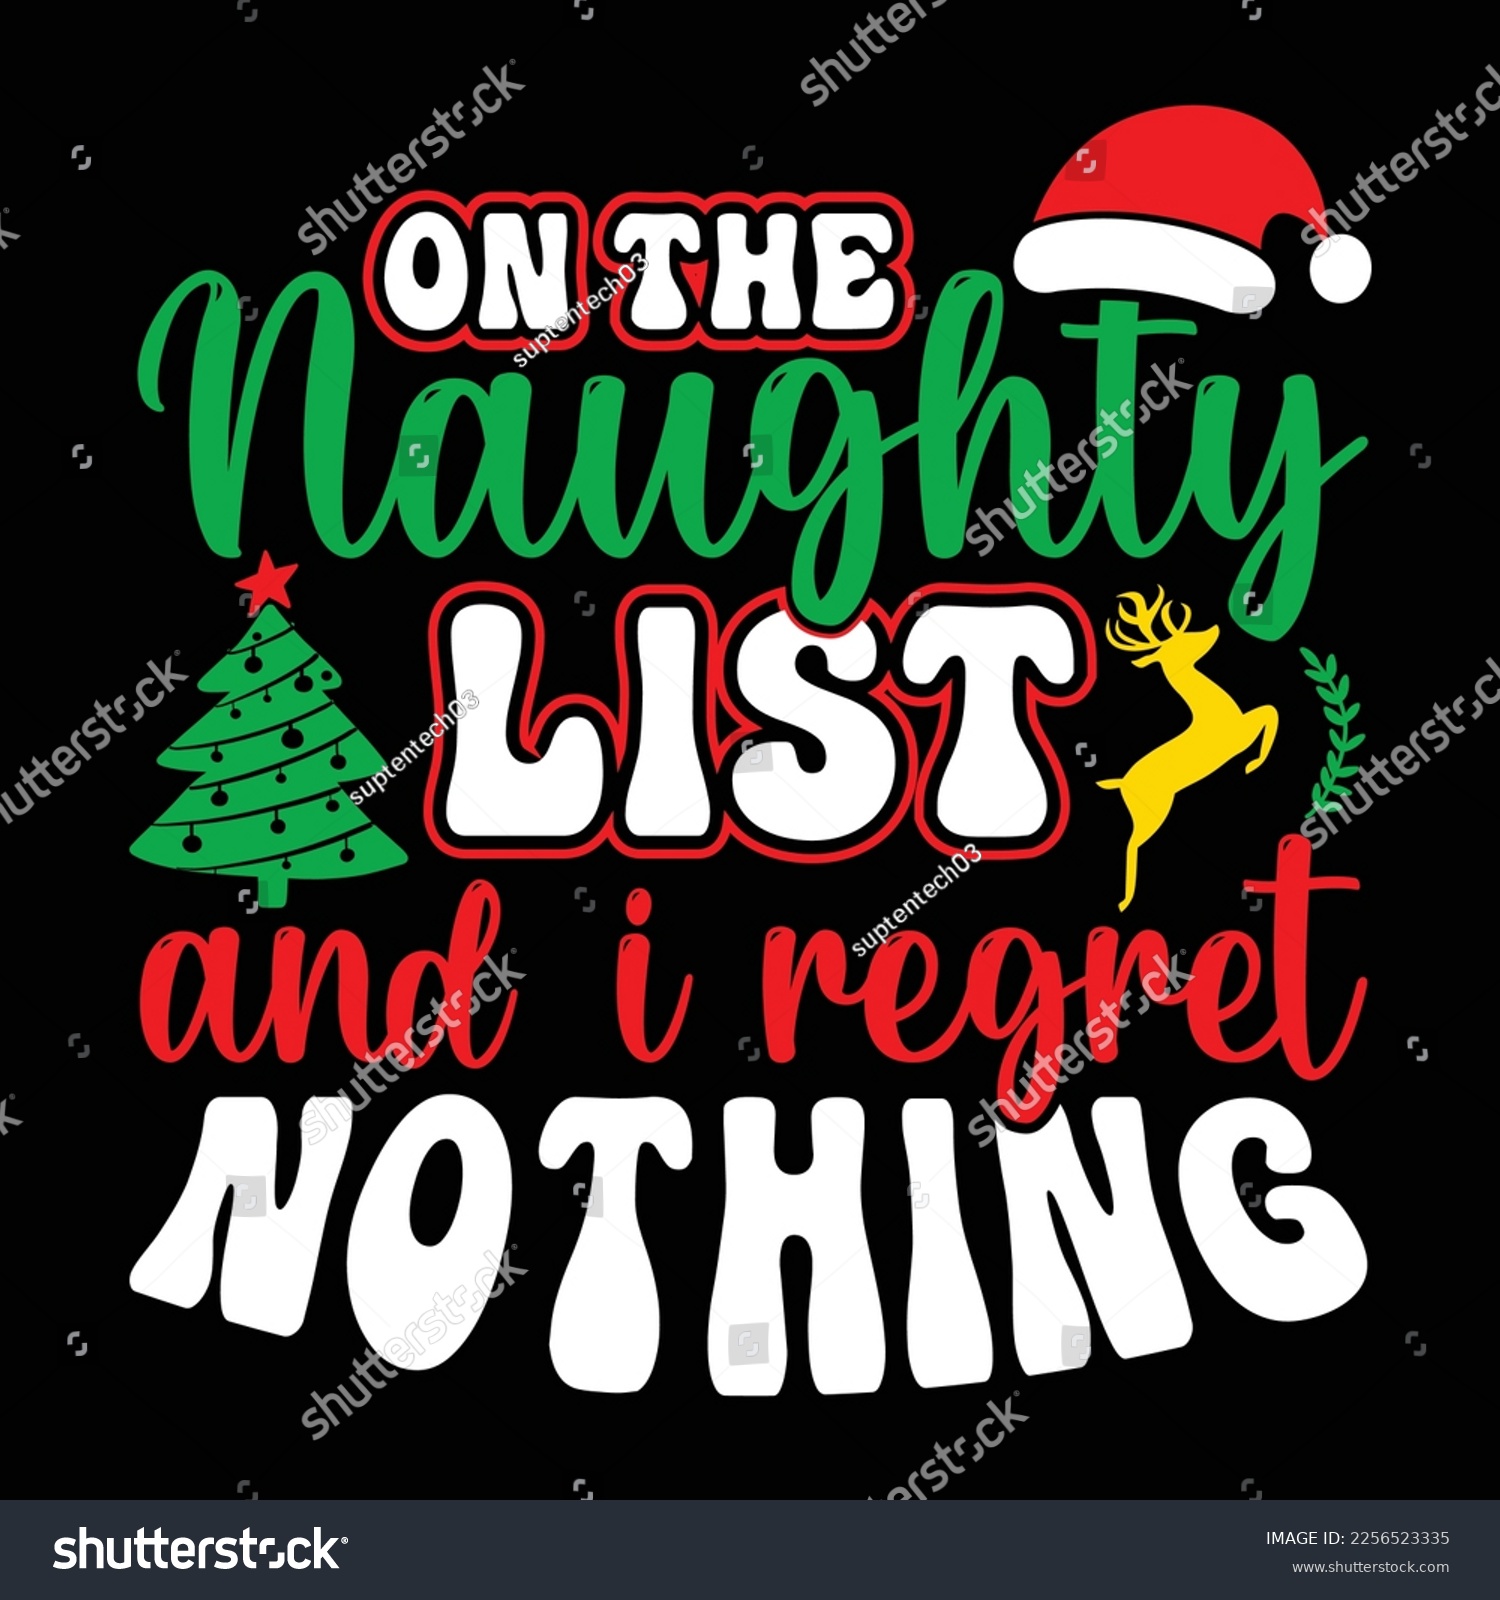 SVG of On The Naughty List And I Regret, Merry Christmas shirts Print Template, Xmas Ugly Snow Santa Clouse New Year Holiday Candy Santa Hat vector illustration for Christmas hand lettered svg